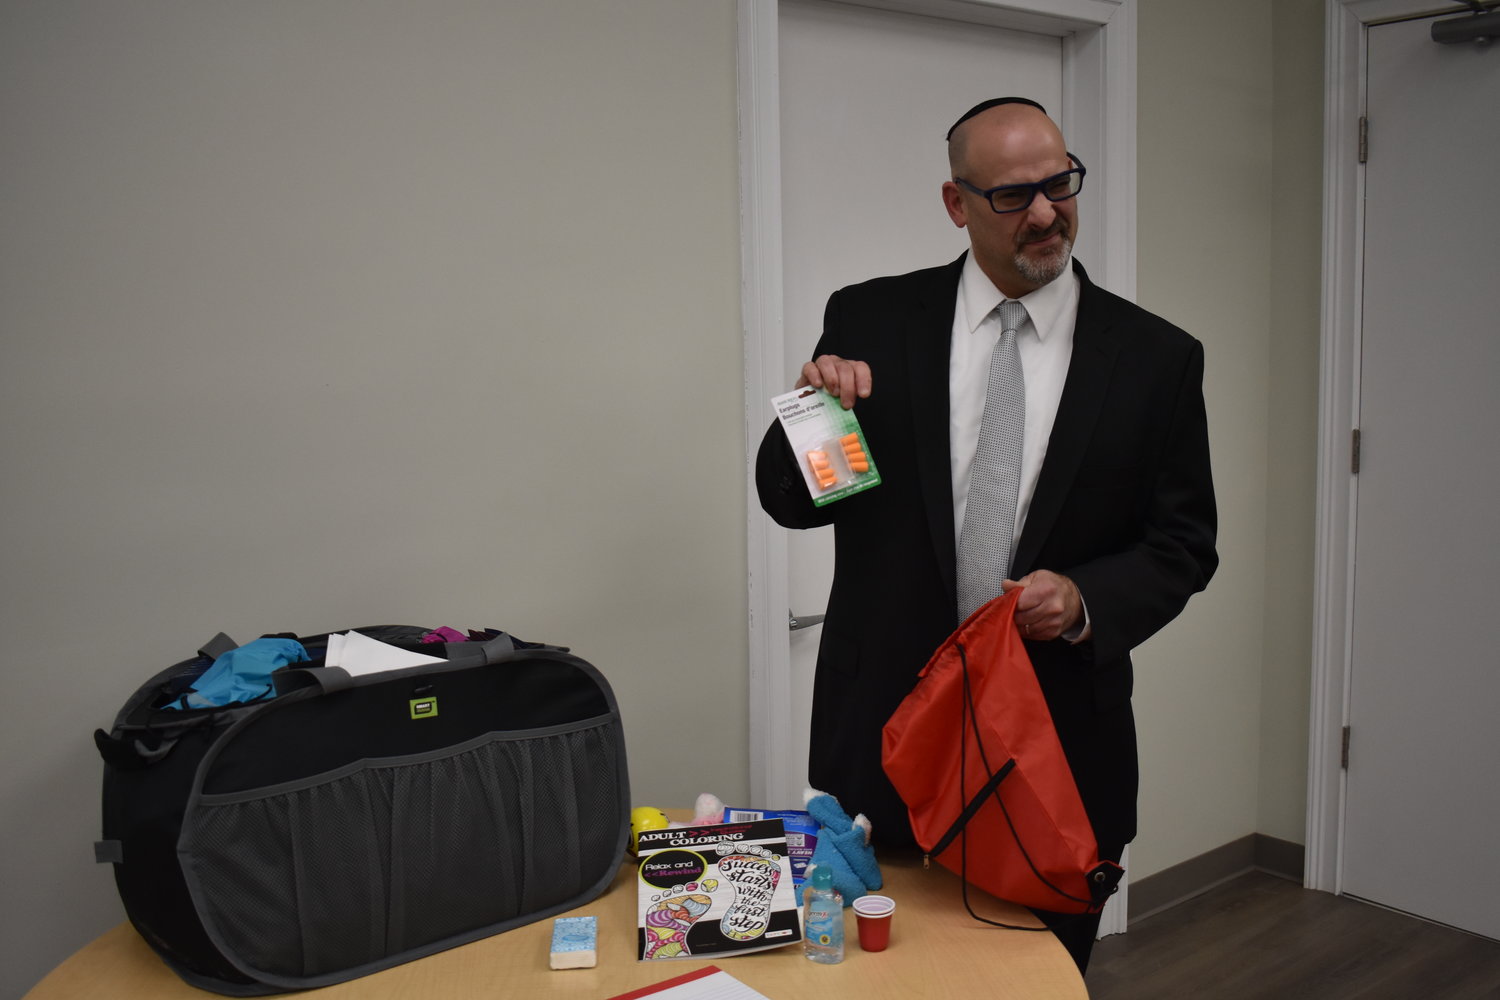 Dr. Steven Levey showed off the parental survival kits that he brought to hand out, they included everything from ear plugs and hand sanitizer to fuzzy socks and an adult coloring book.